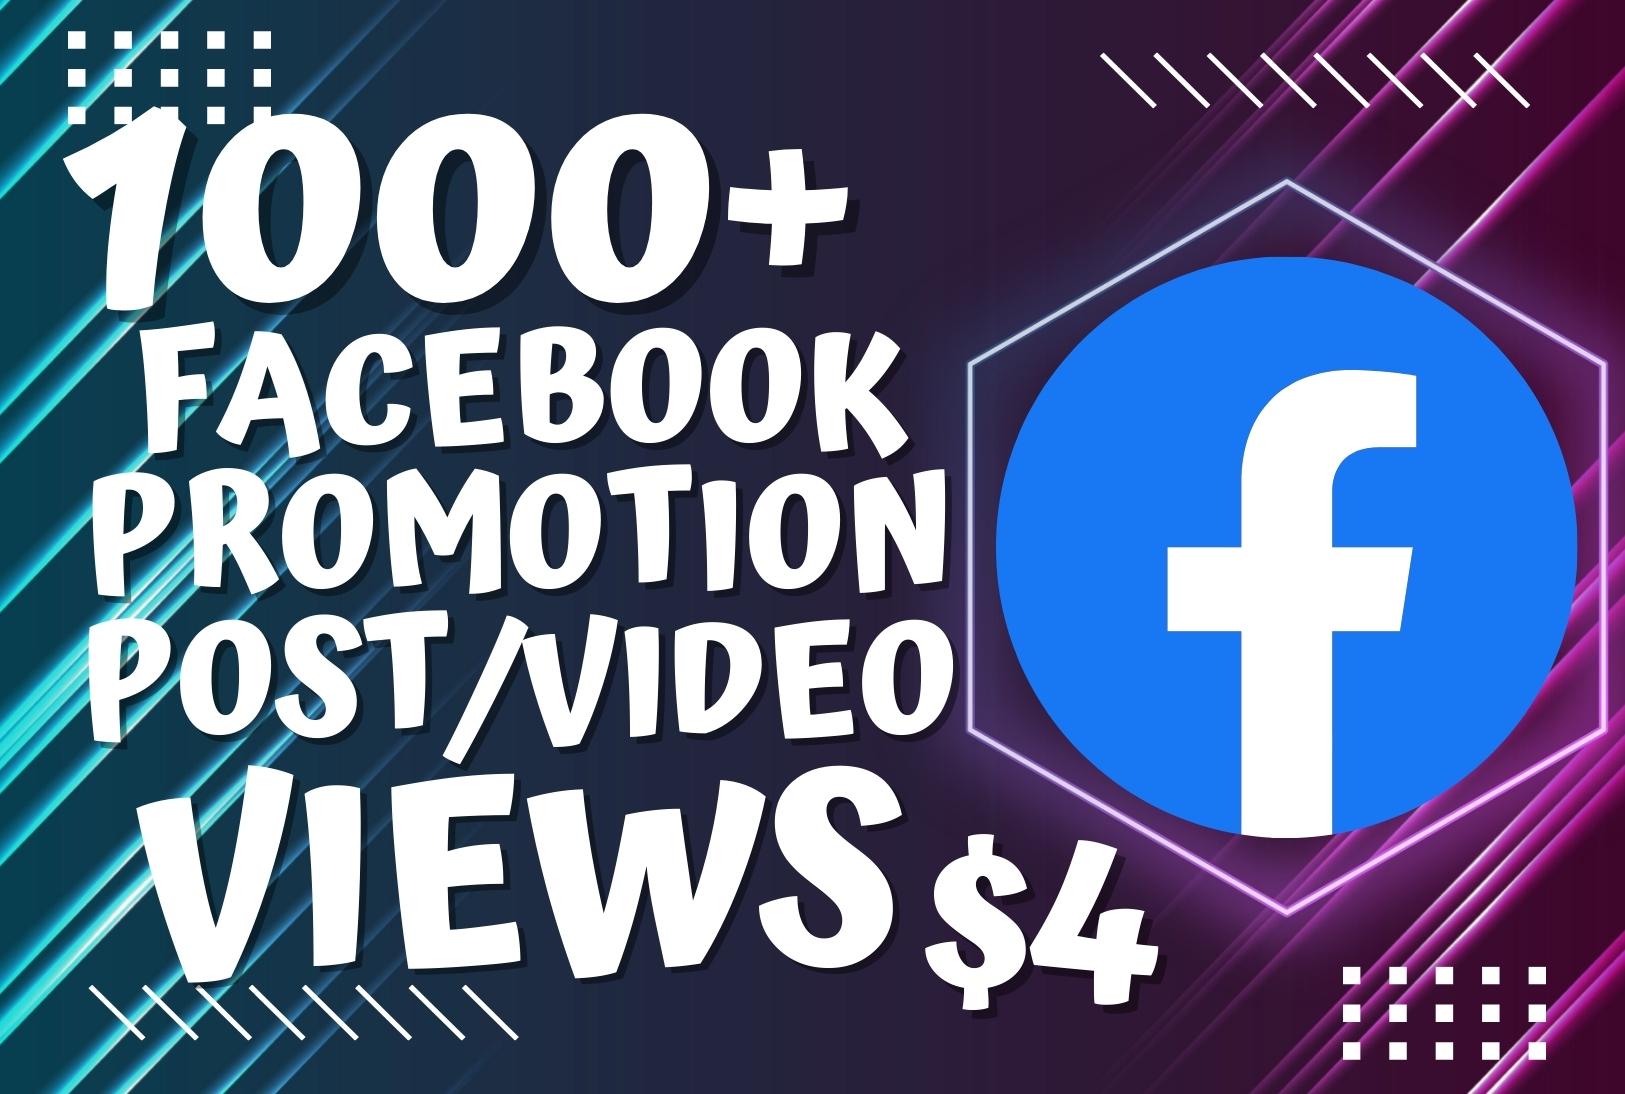 1000 High retention views on Facebook video Facebook post promotion and marketing